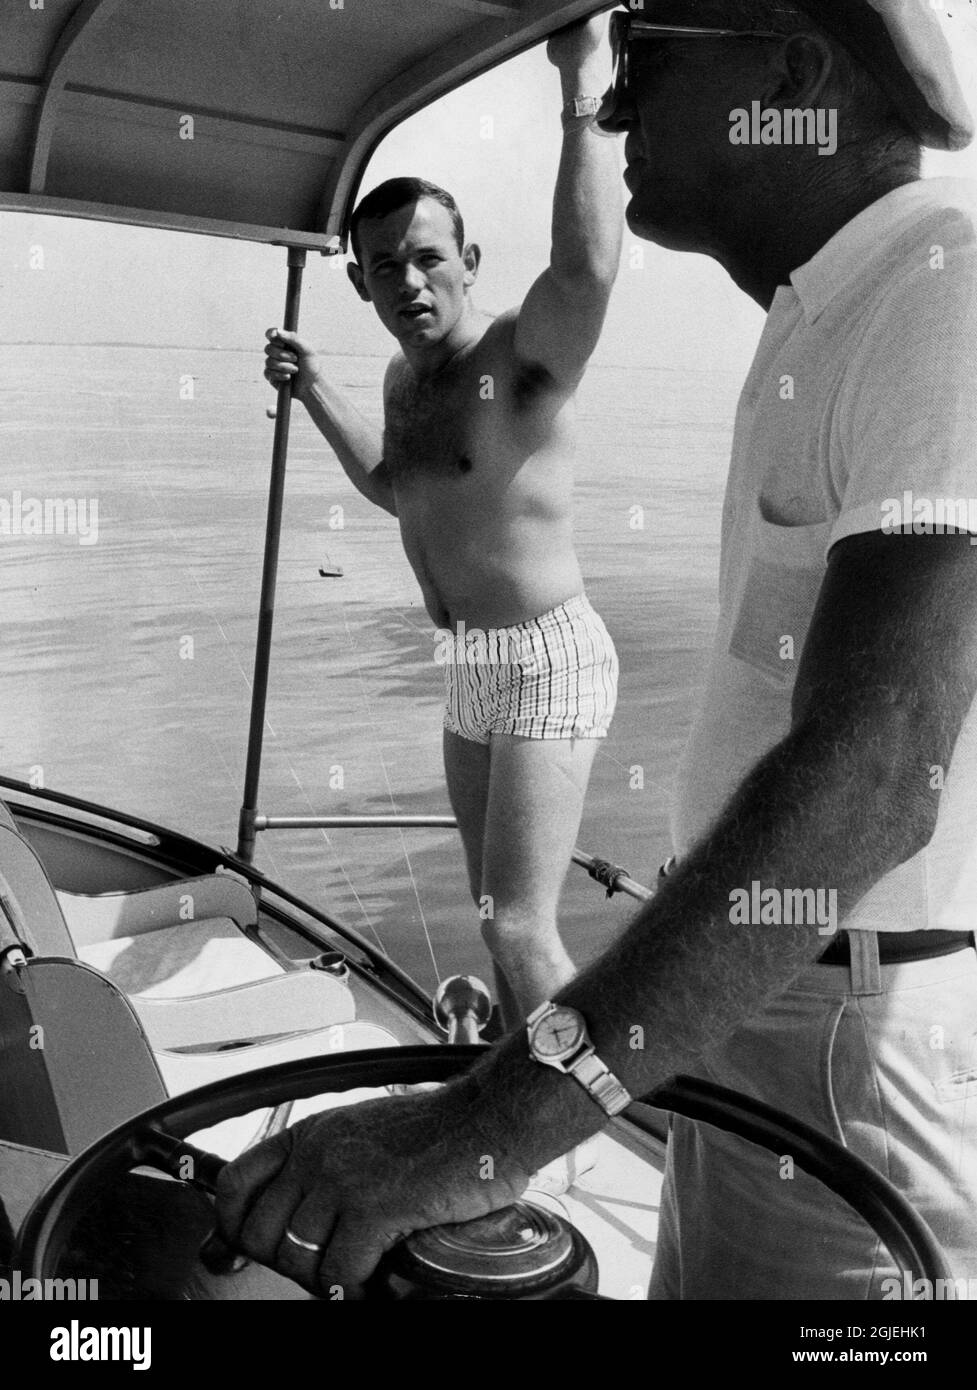 Swedish world heavyweight boxing champion Ingemar Johansson (L) during a fishing trip together with millionaire Gustav von Reis in Florida in 1959. Stock Photo